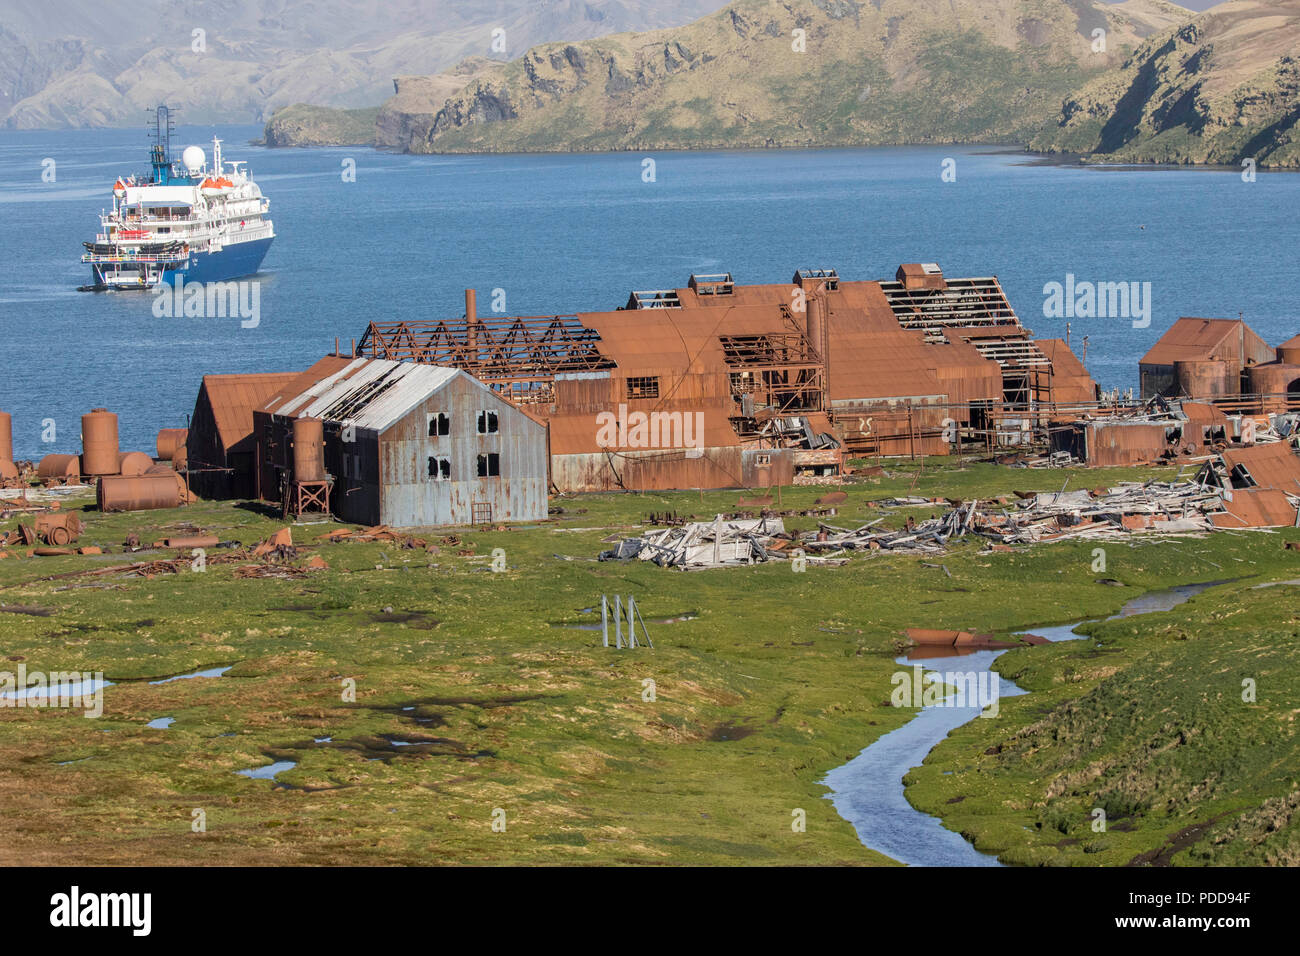 Abandoned whaling station on a South Georgia island in the antarctic Stock Photo